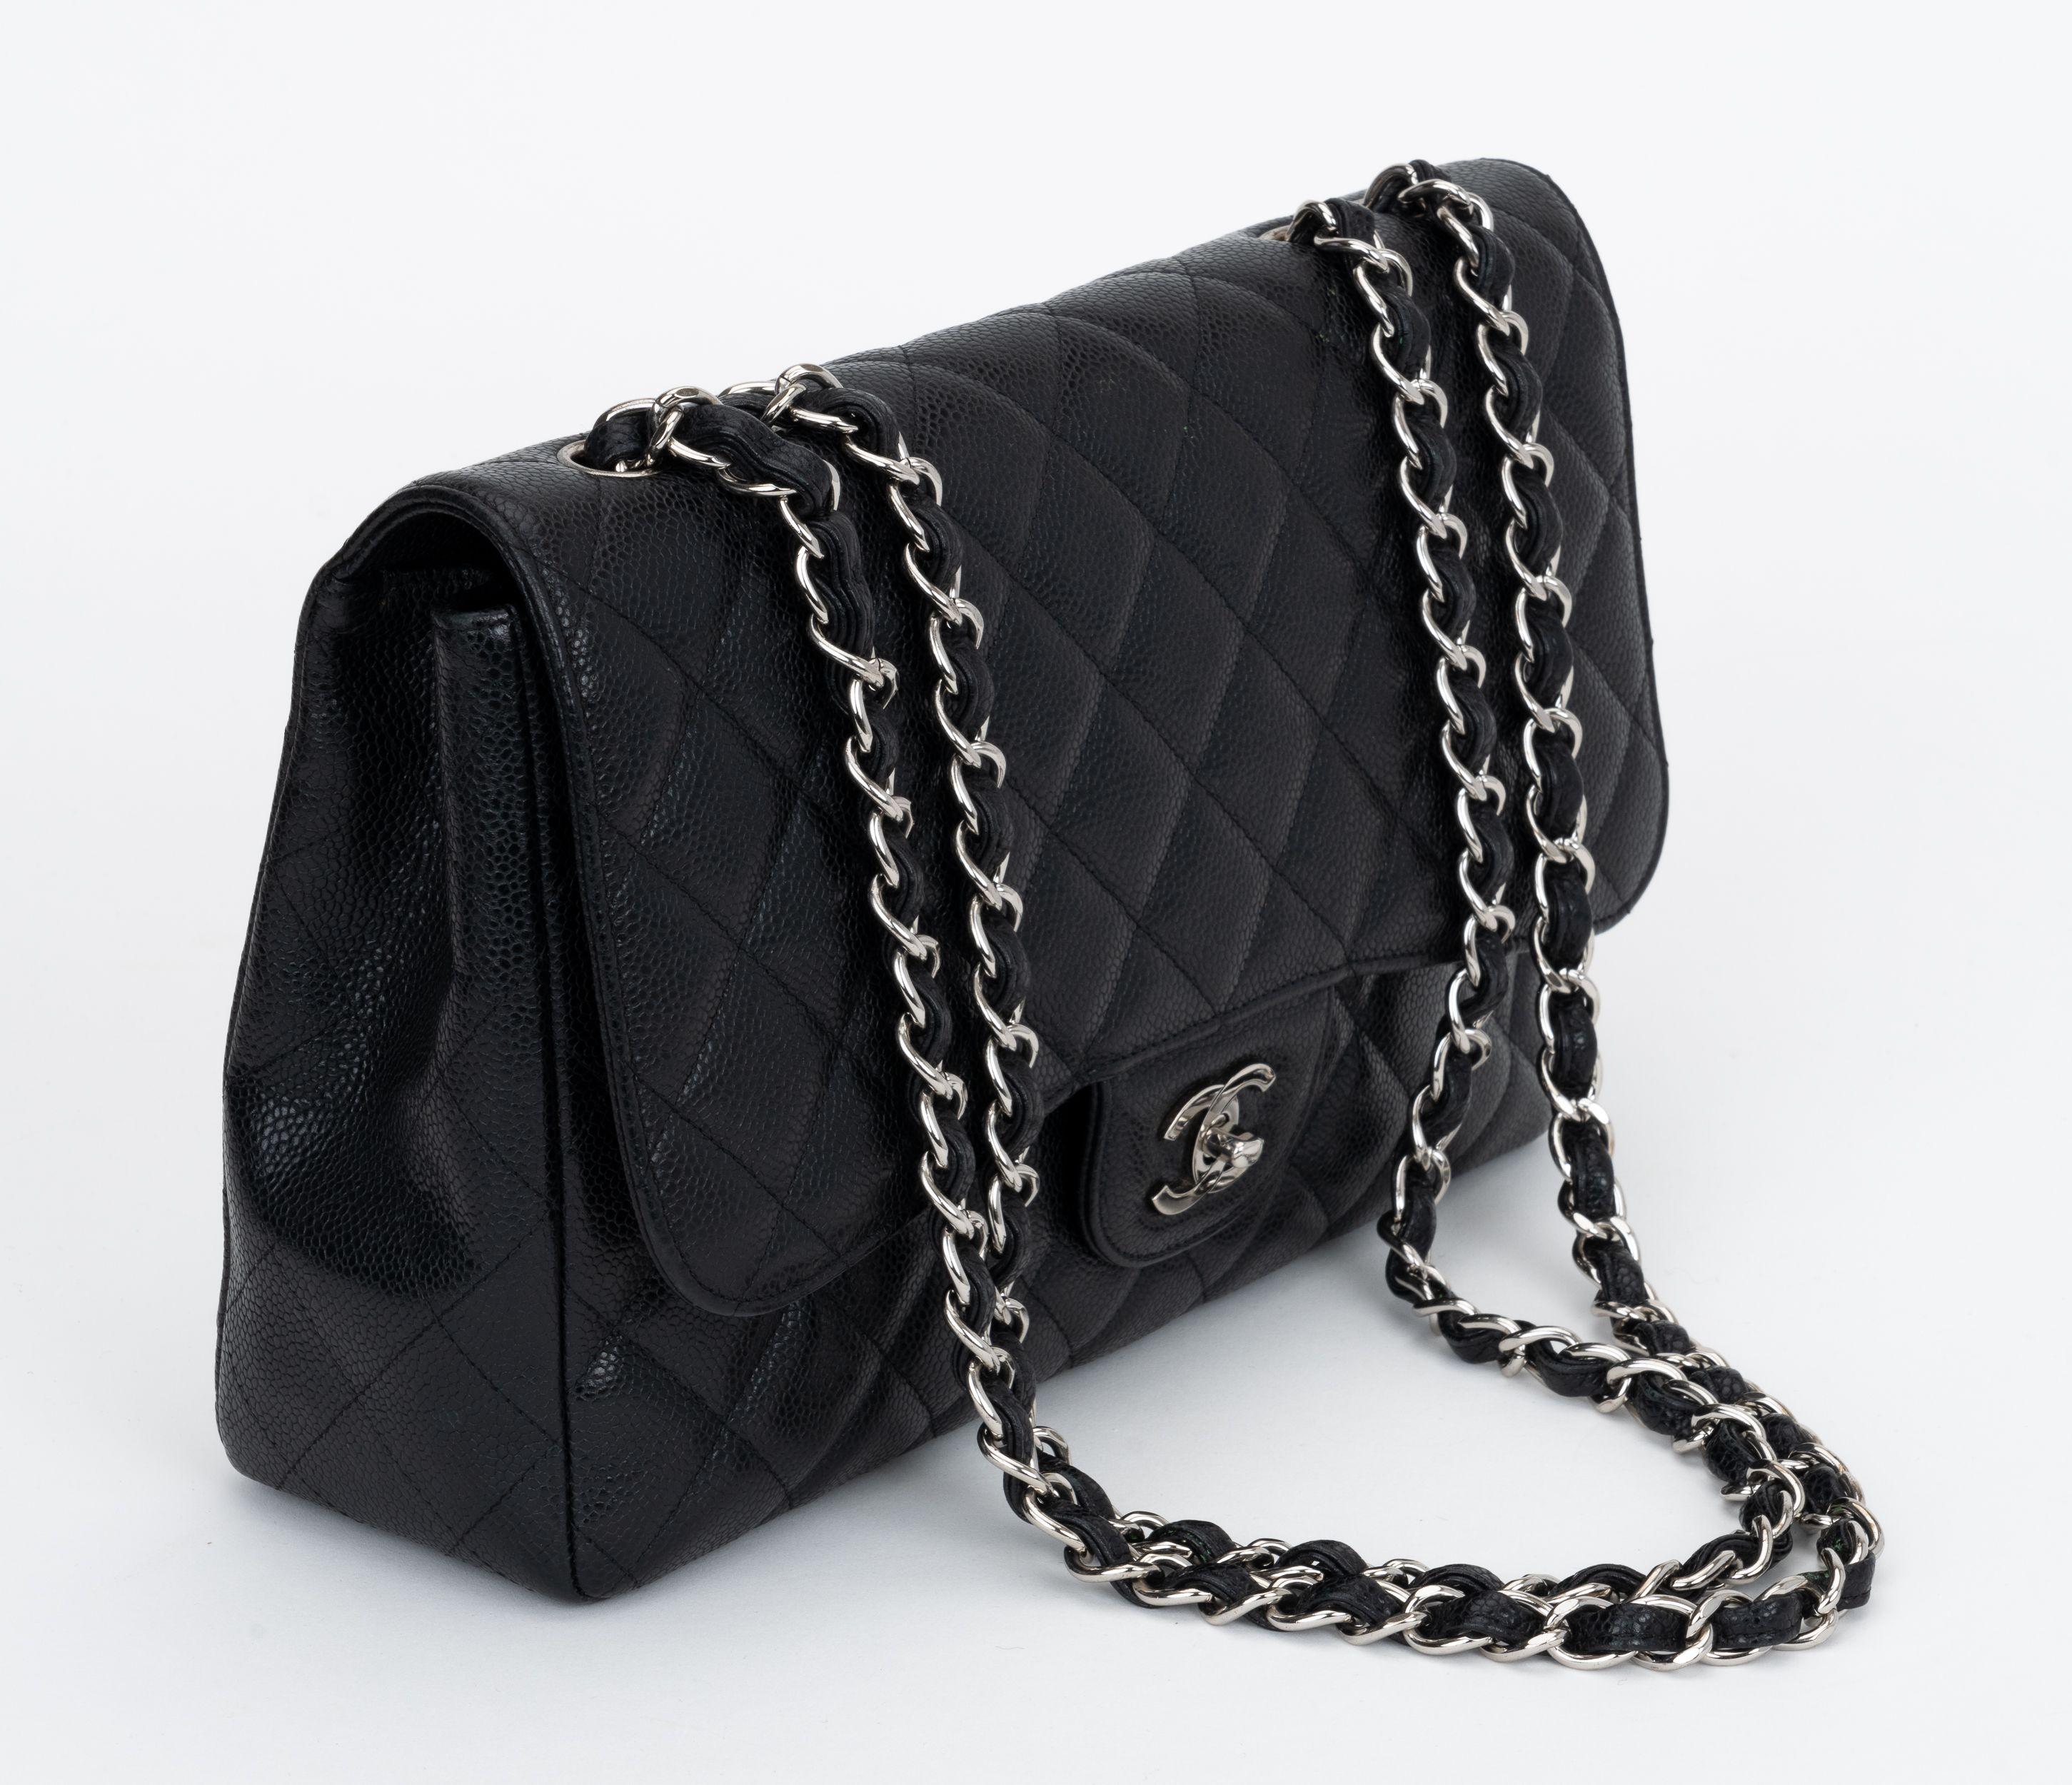 Chanel black caviar leather quilted jumbo single-flap bag.  Silver tone hardware. Shoulder drop, 14